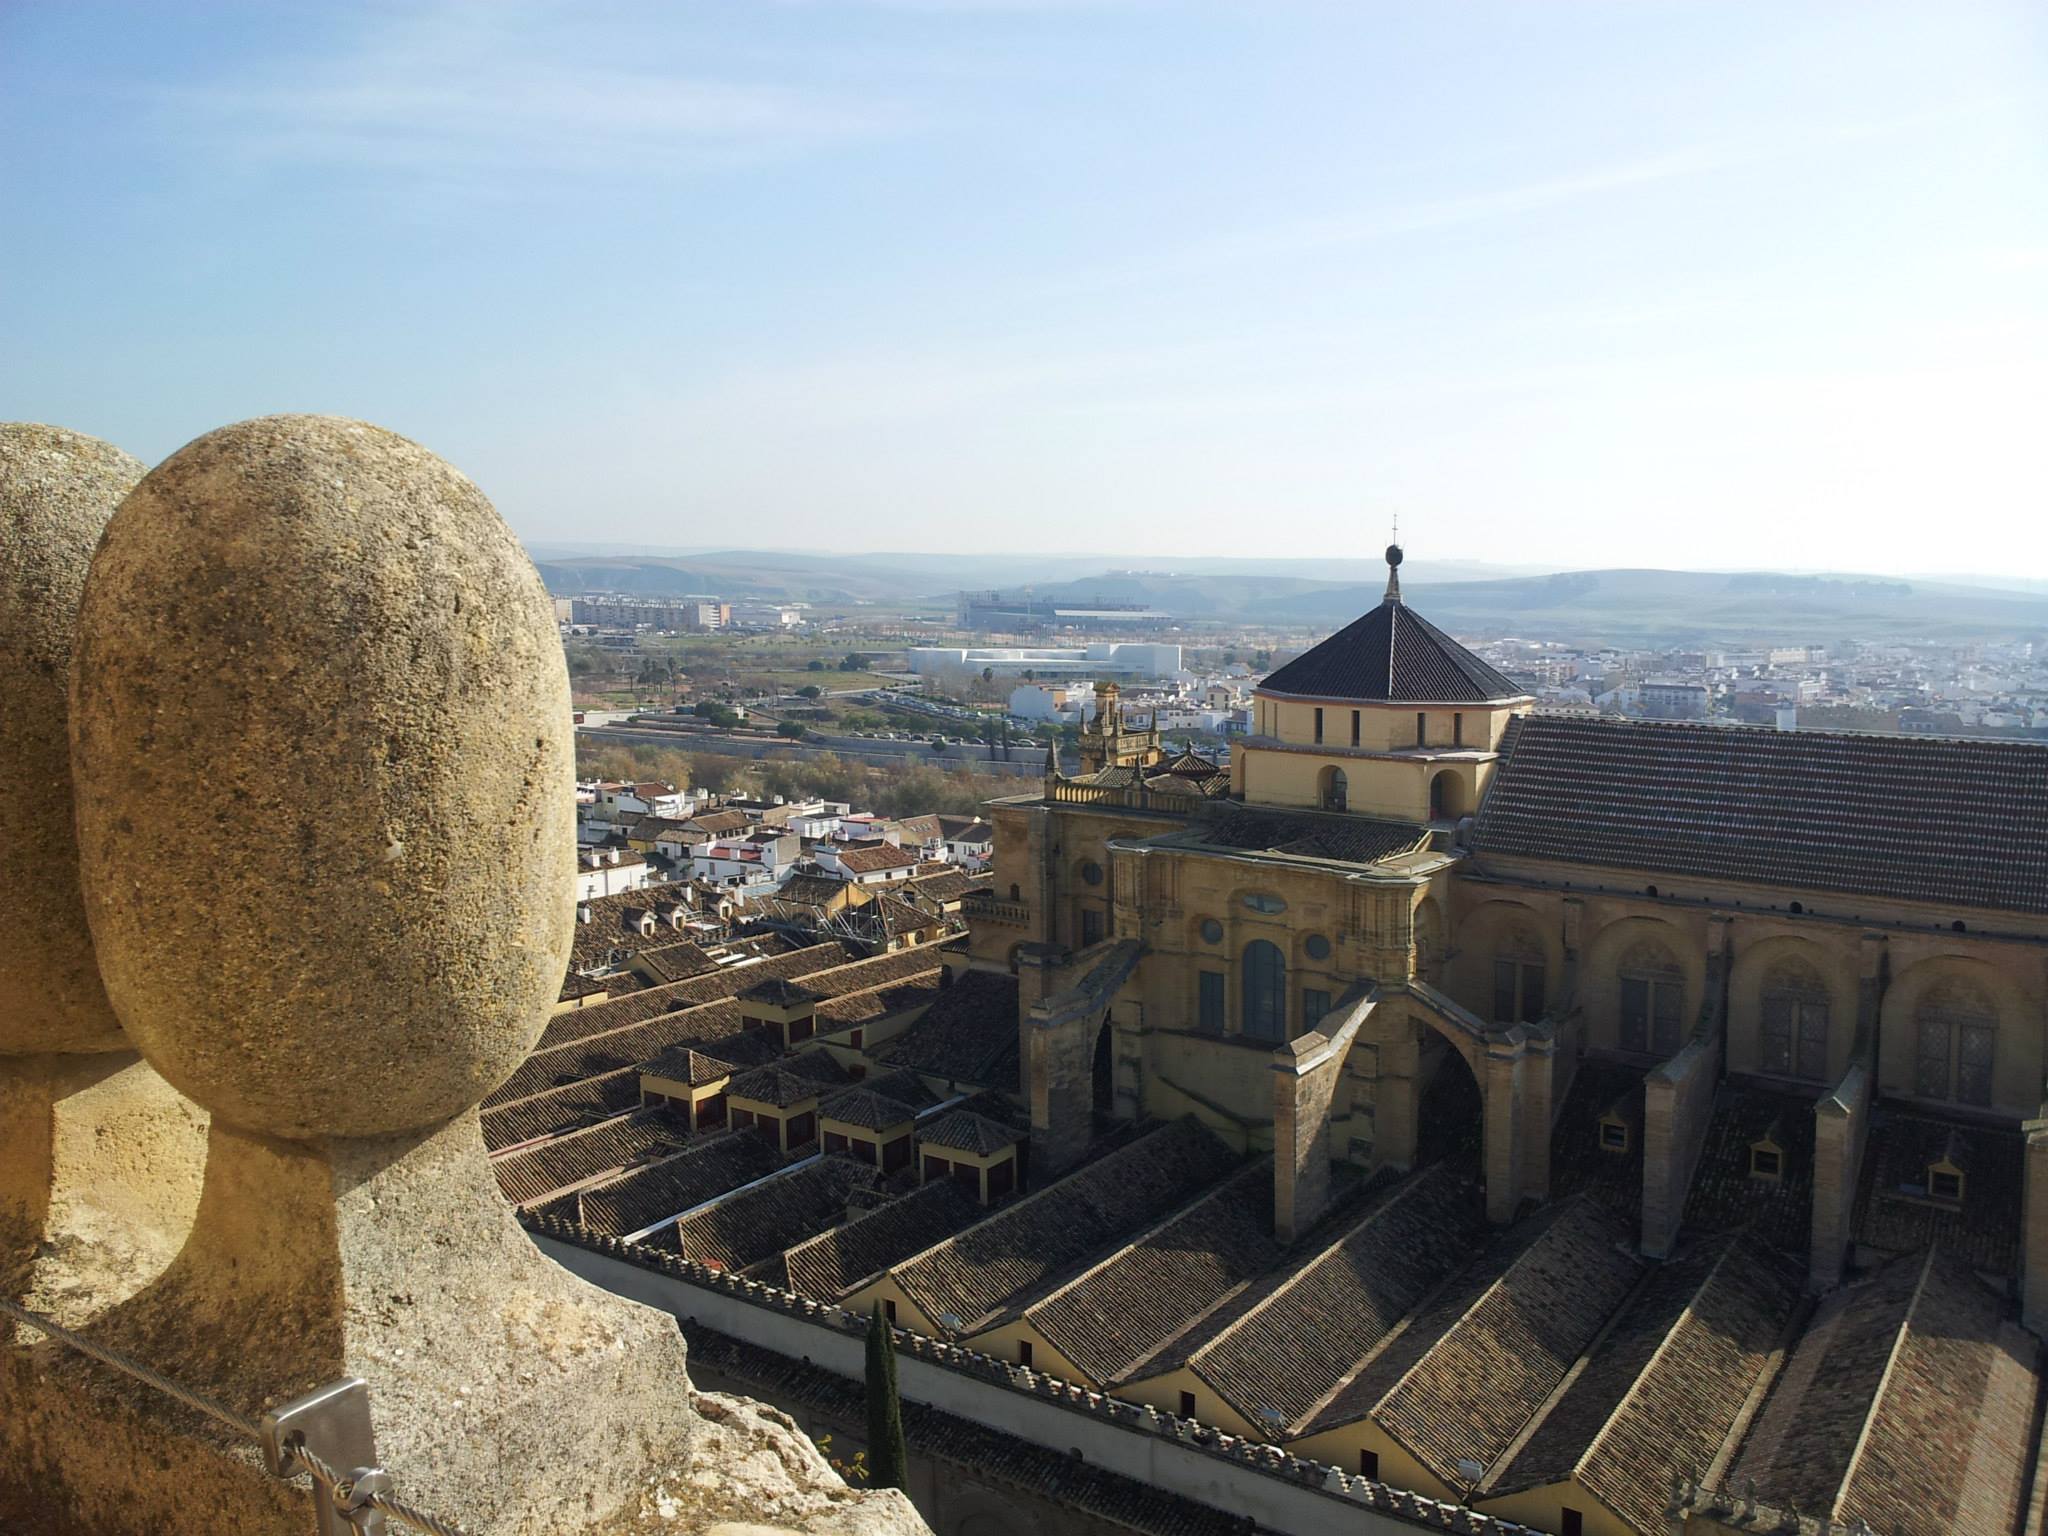 View from the Bell Tower of La Mezquita